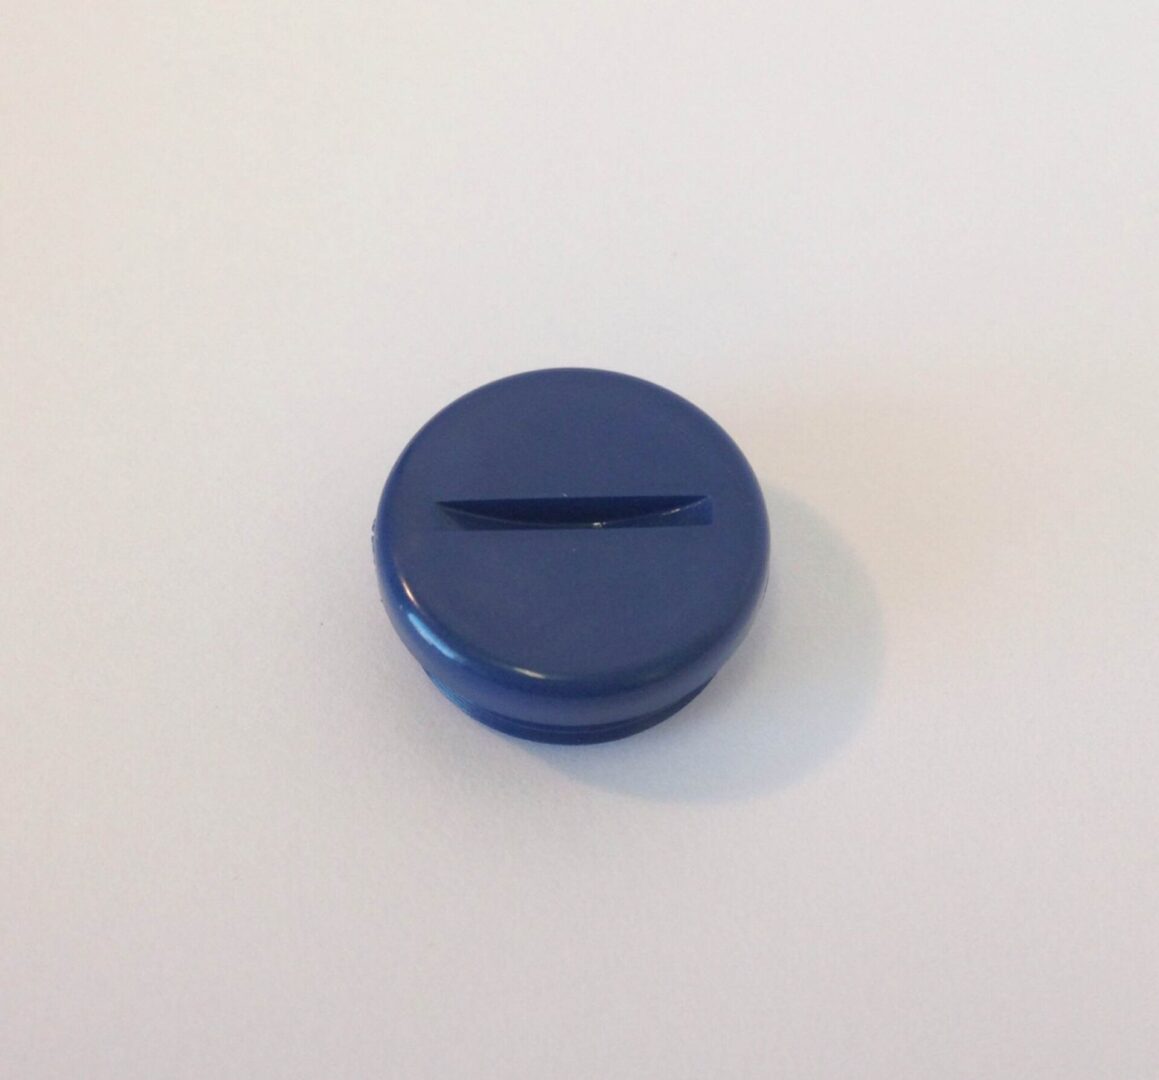 A blue button sitting on top of a table.